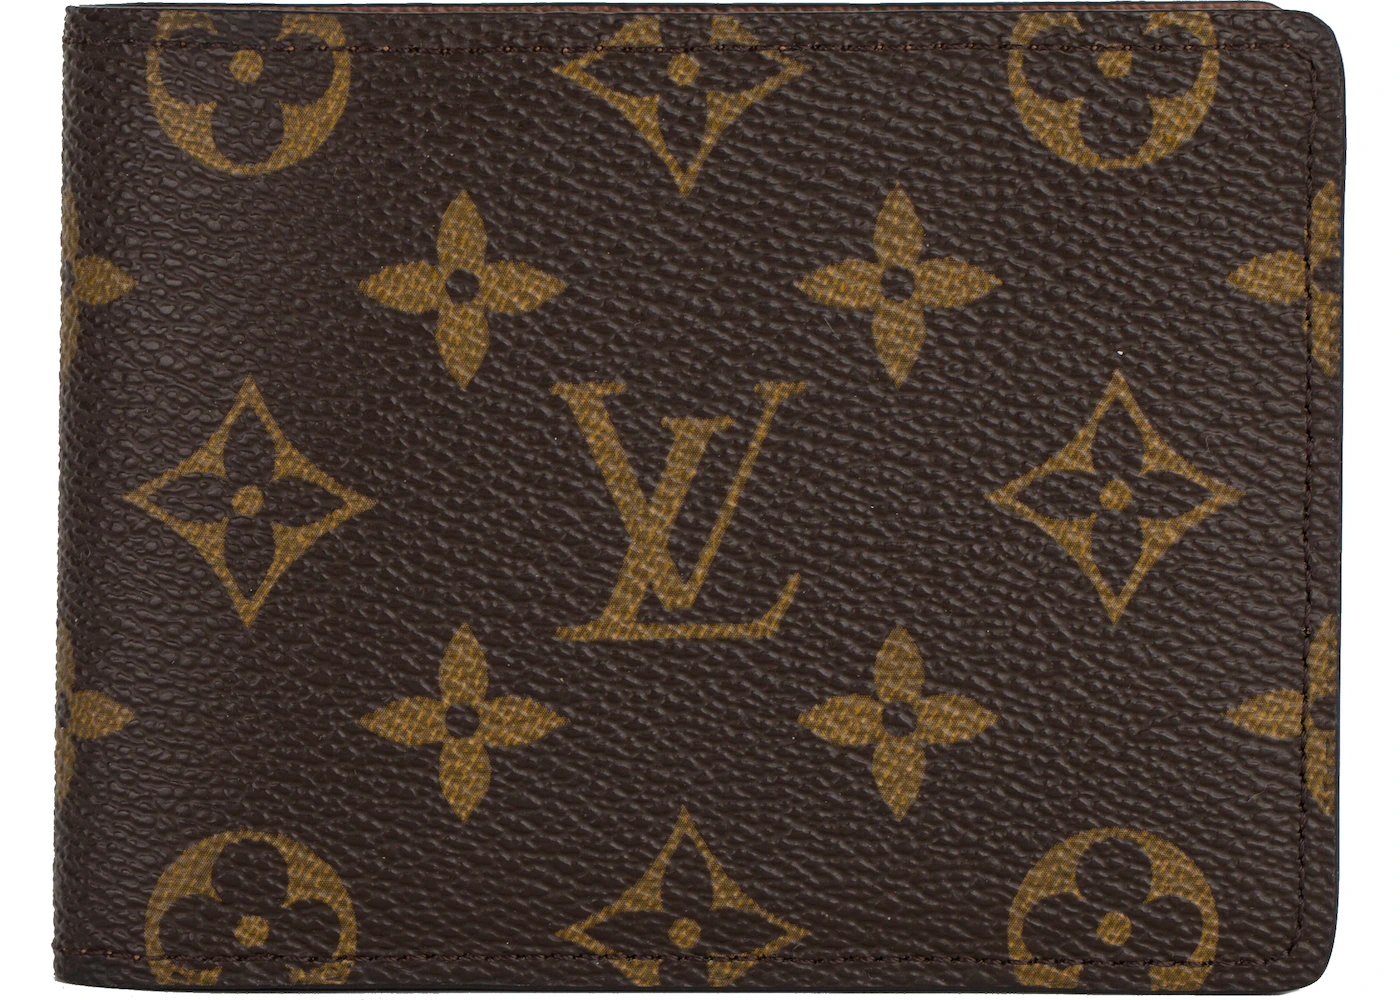 how do i know if my lv wallet is real